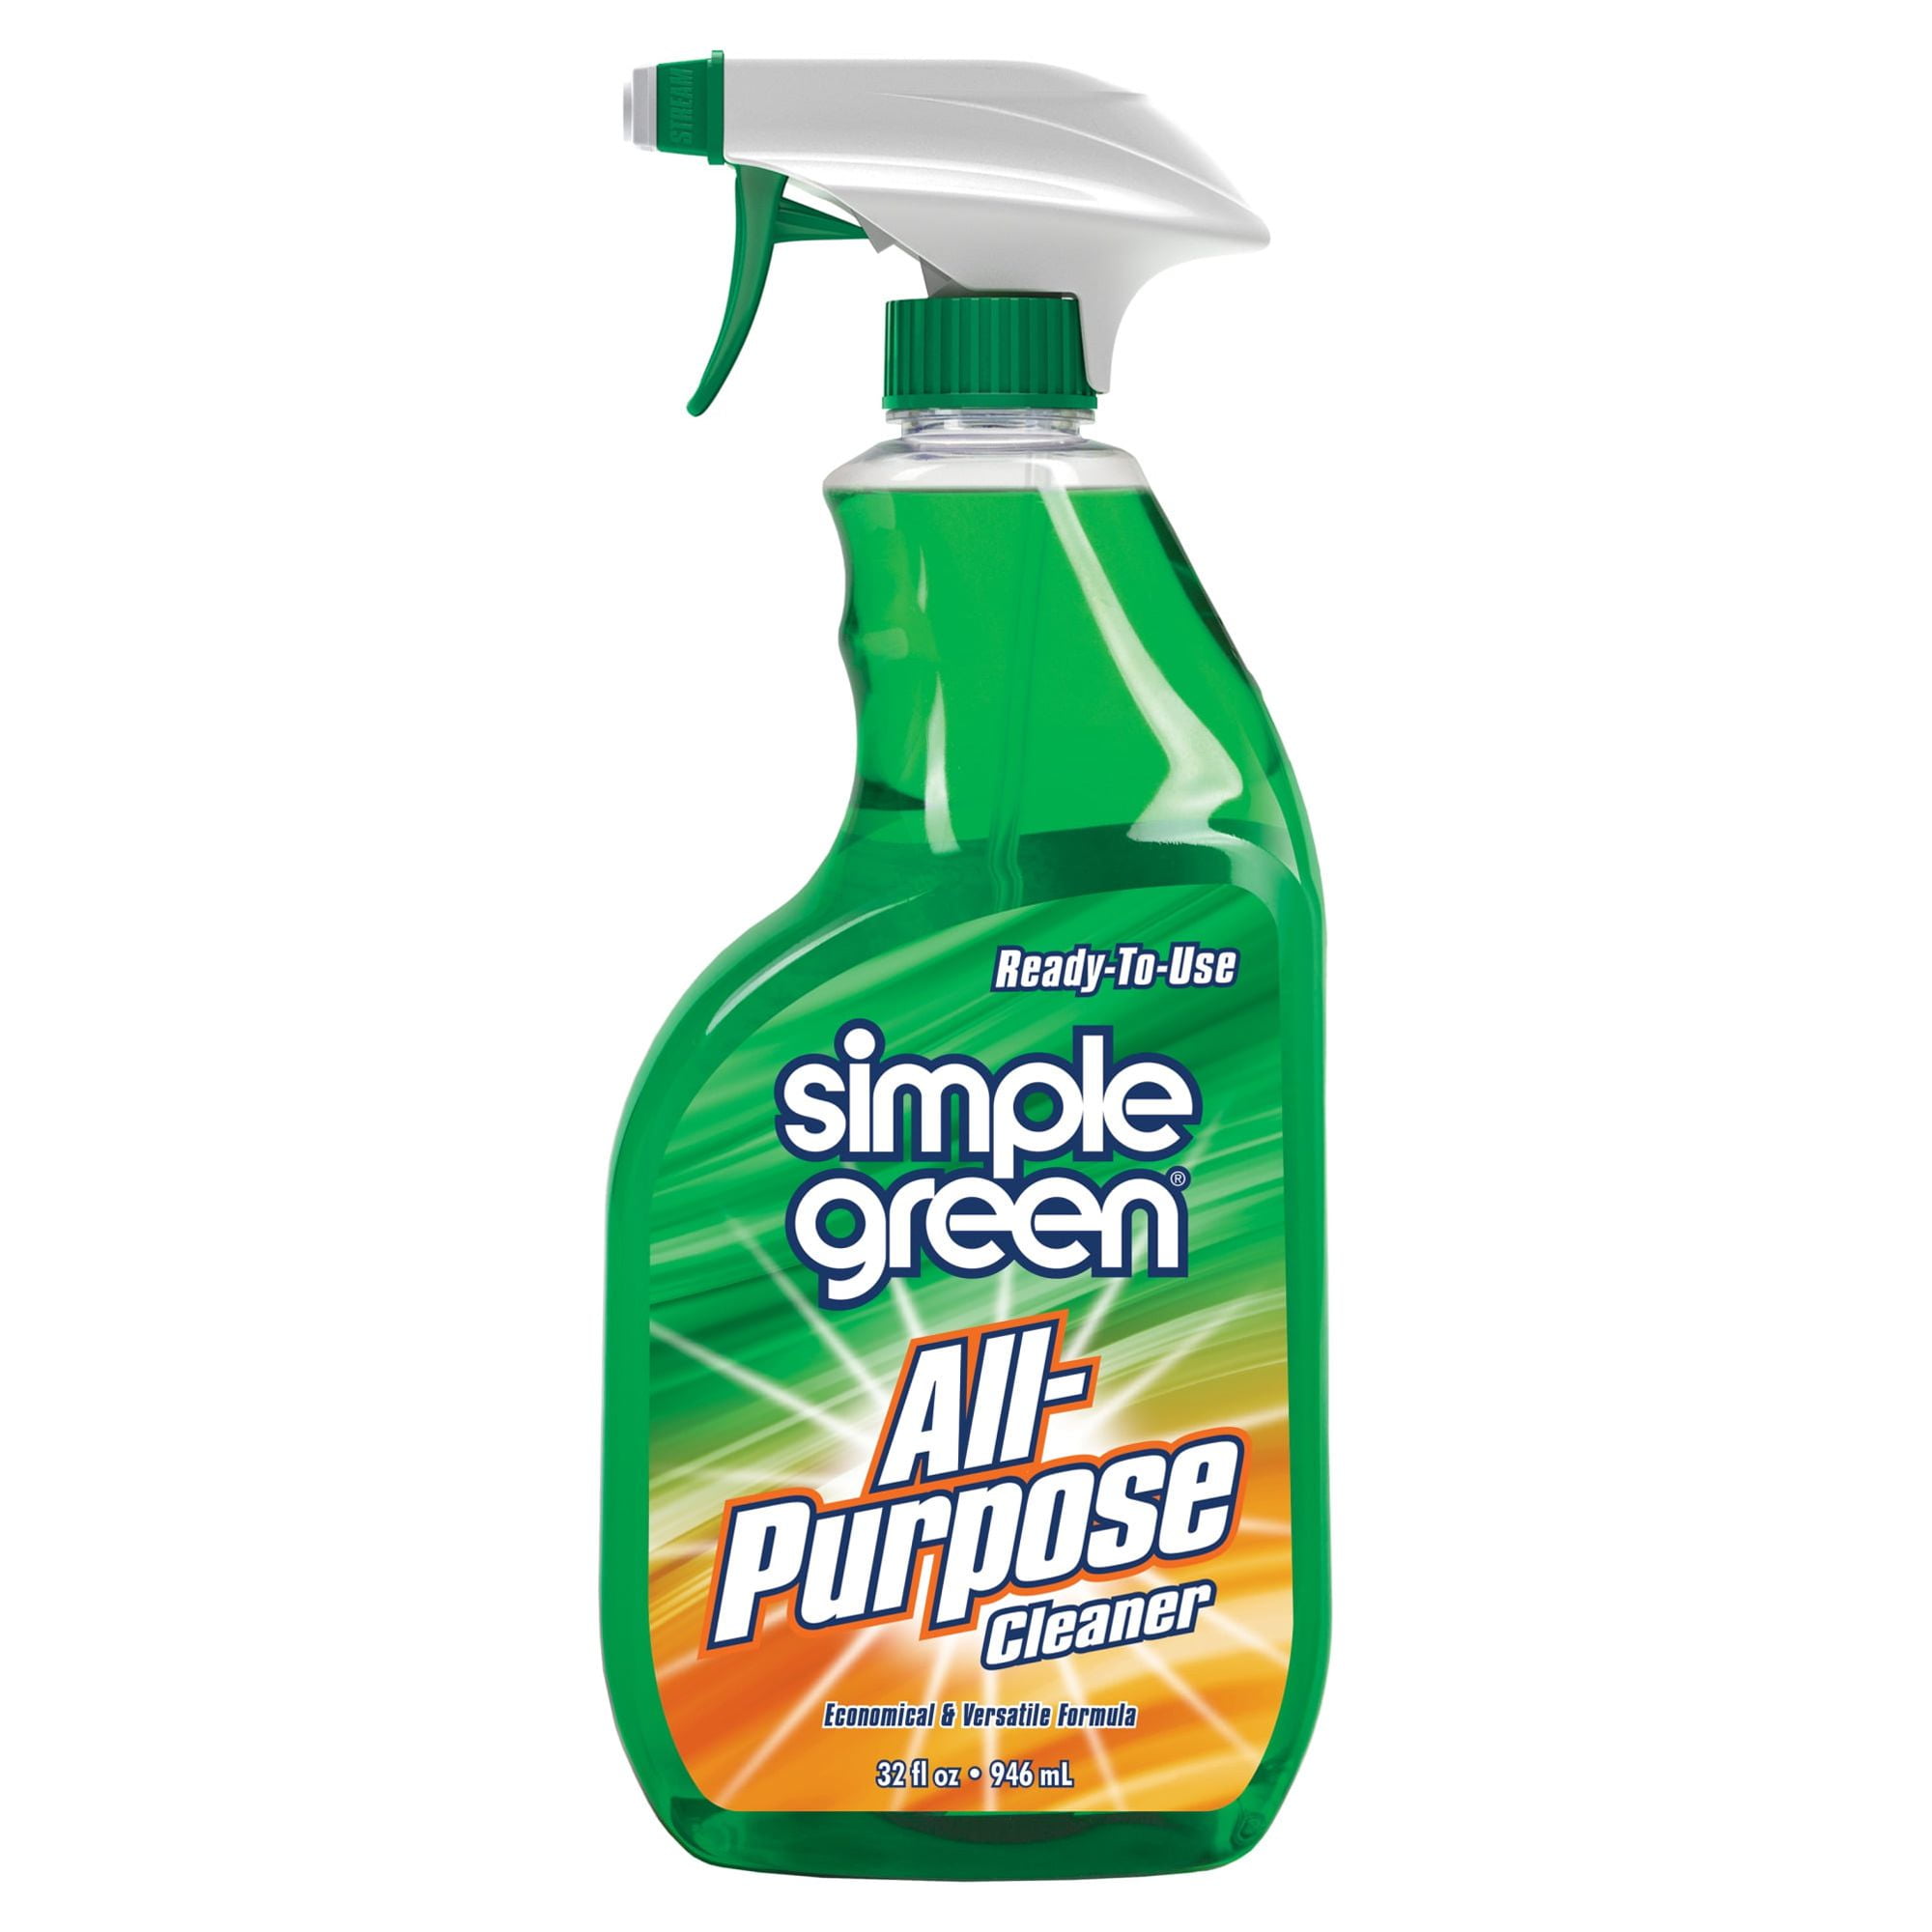 Simple Green All-Purpose Cleaner - 32 fl oz bottle